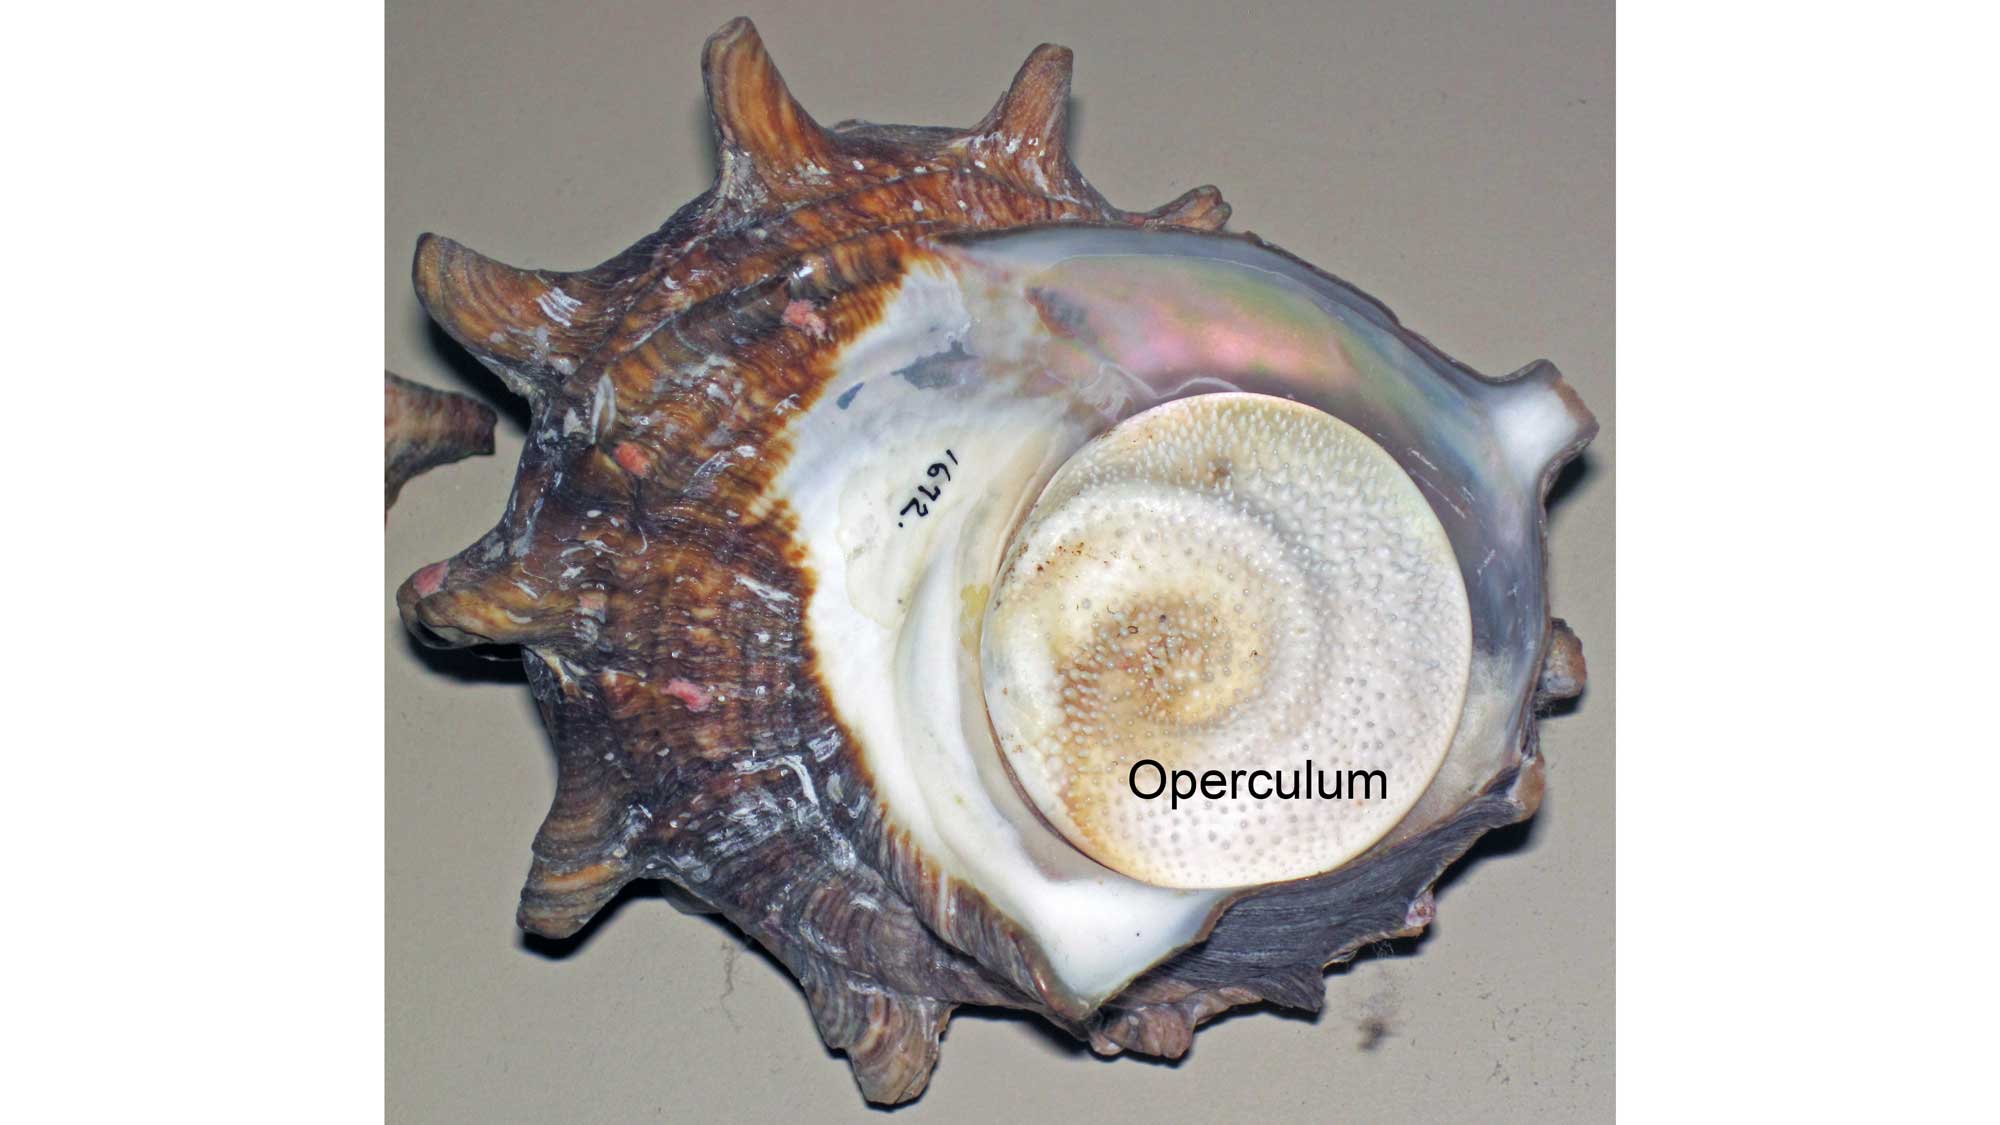 Photograph of a specimen of horned turban shell with the operculum identified.